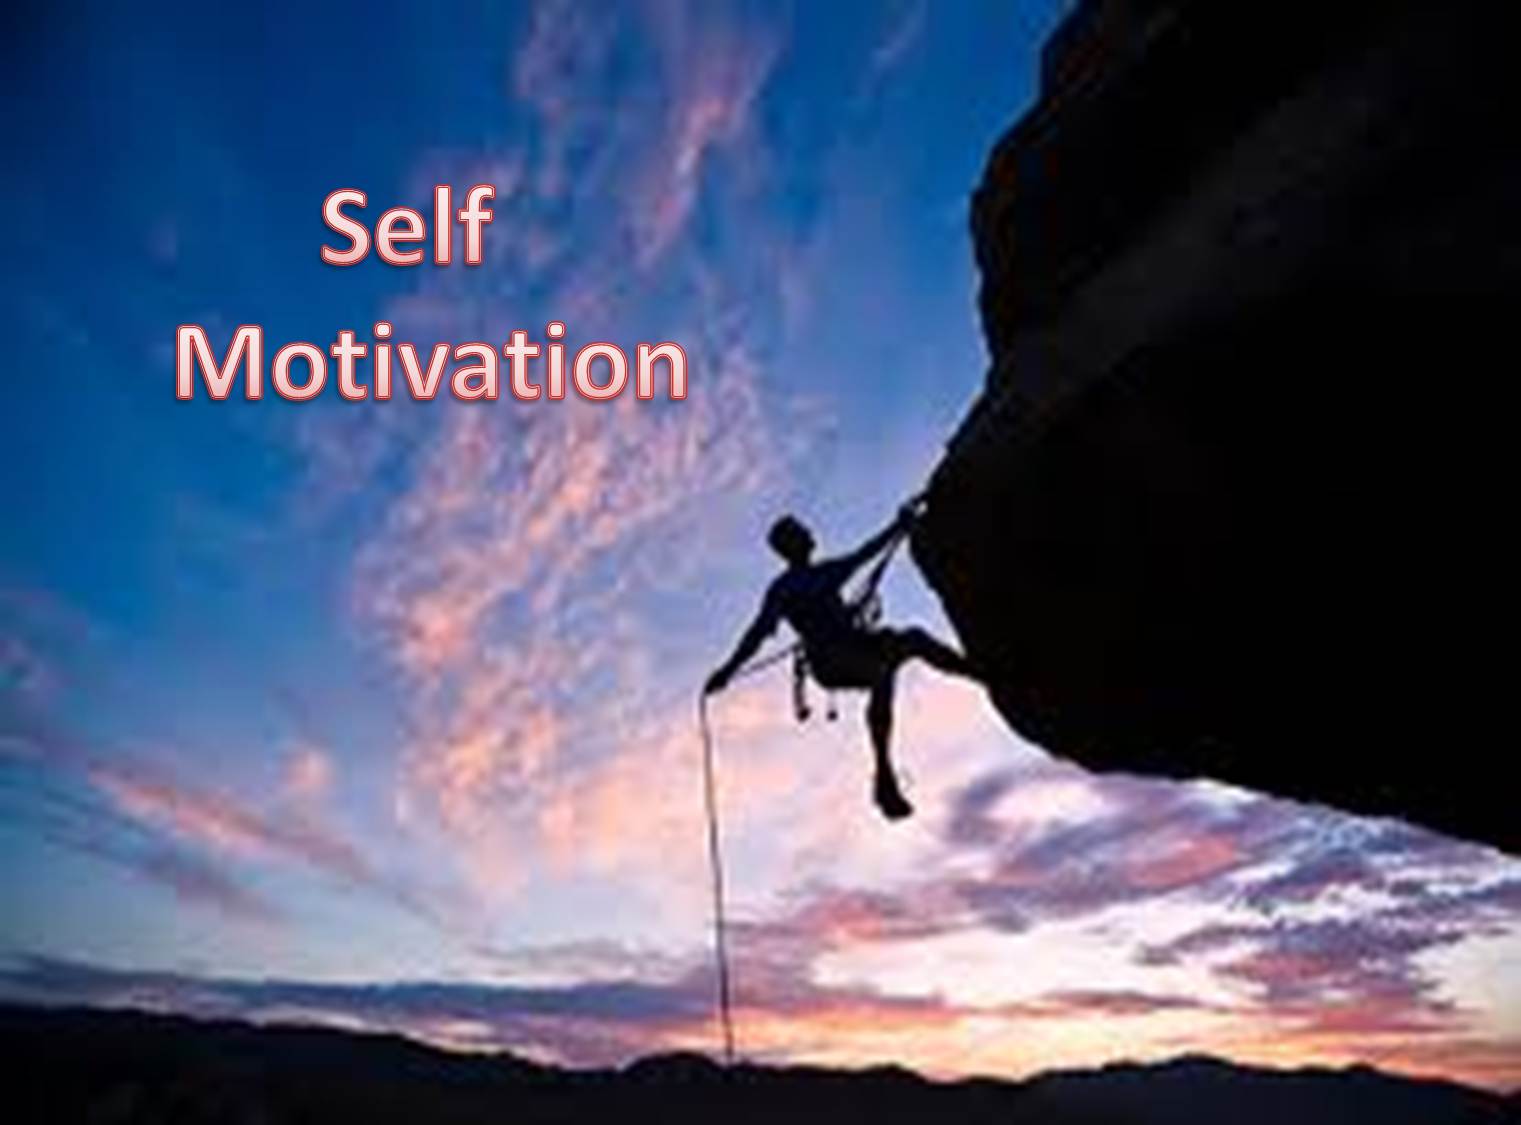 How To Stay Self-Motivated